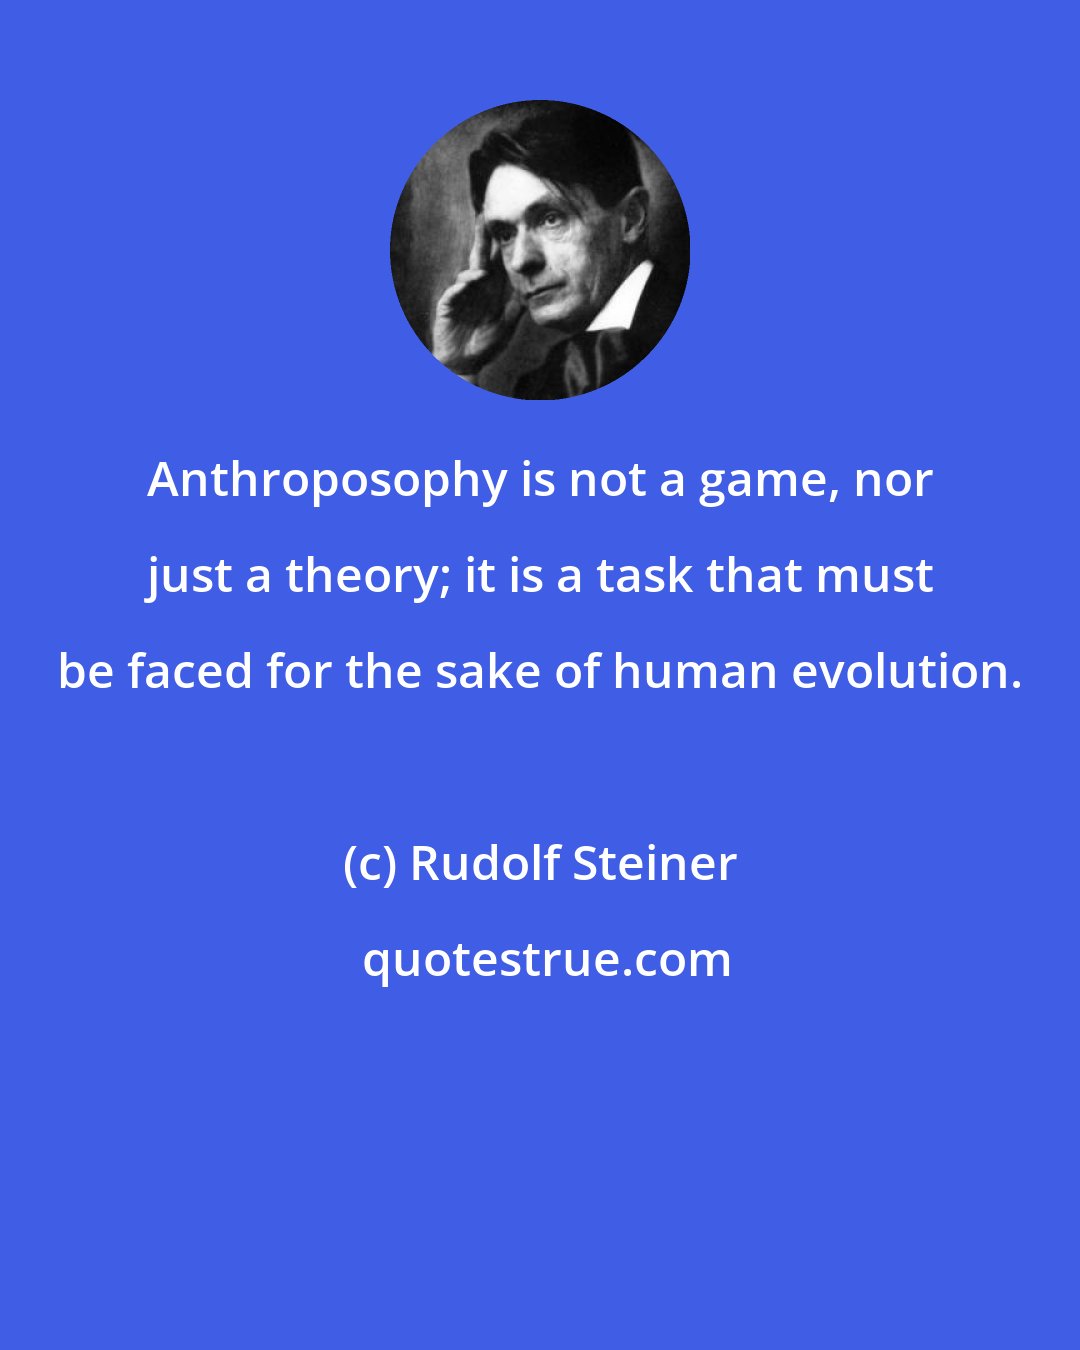 Rudolf Steiner: Anthroposophy is not a game, nor just a theory; it is a task that must be faced for the sake of human evolution.